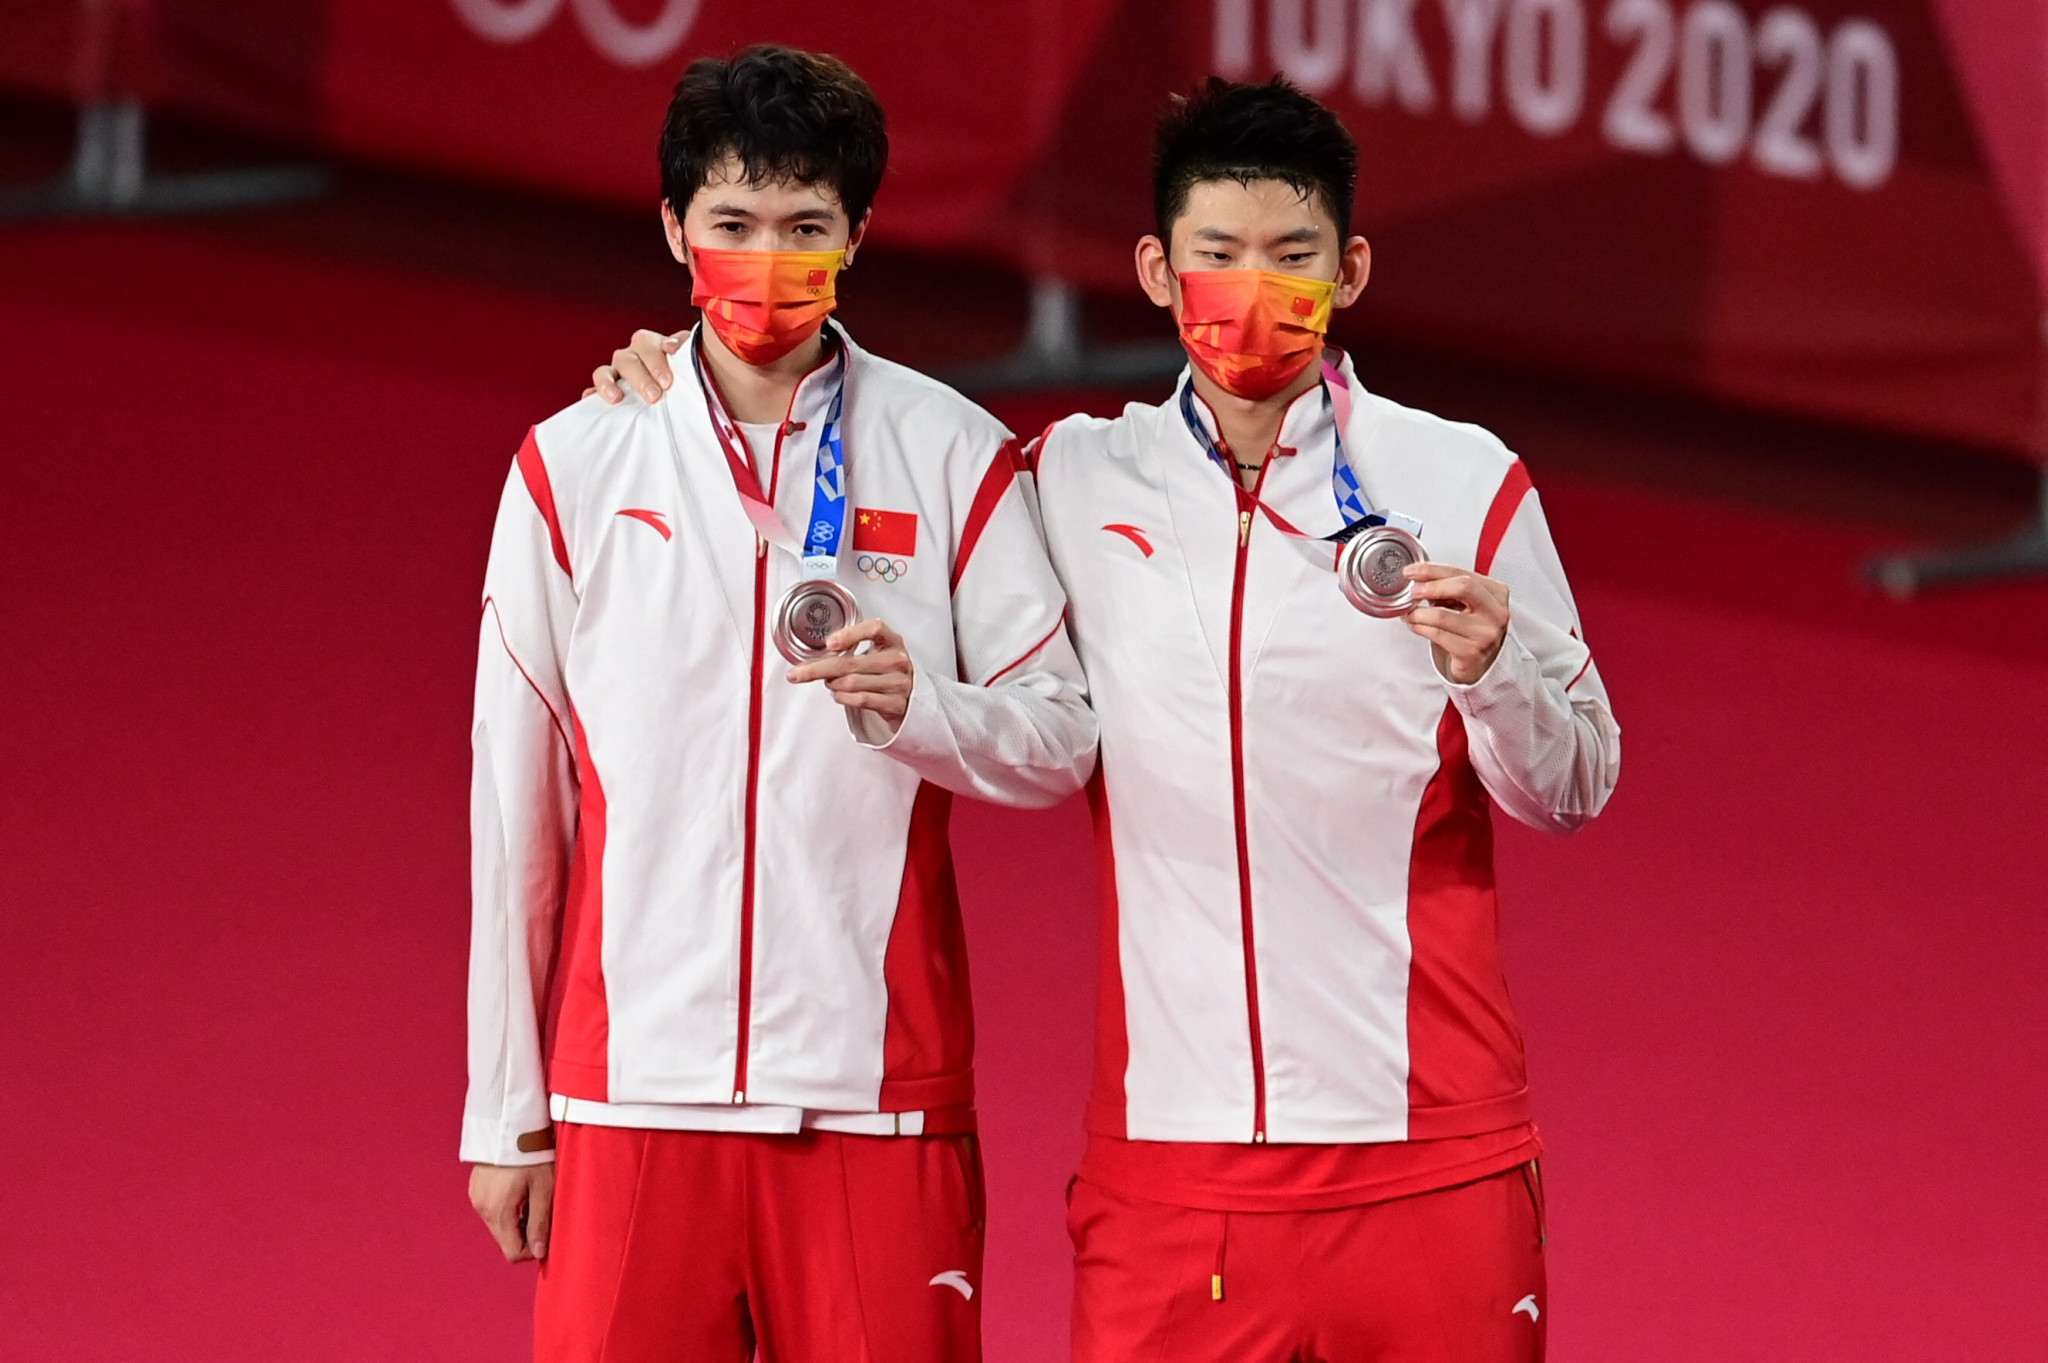 Li Junhui, left, and Liu Yuchen - who claimed silver at Tokyo 2020 - are among four Chinese badminton players to be punished by the BWF in an integrity case ©Getty Images